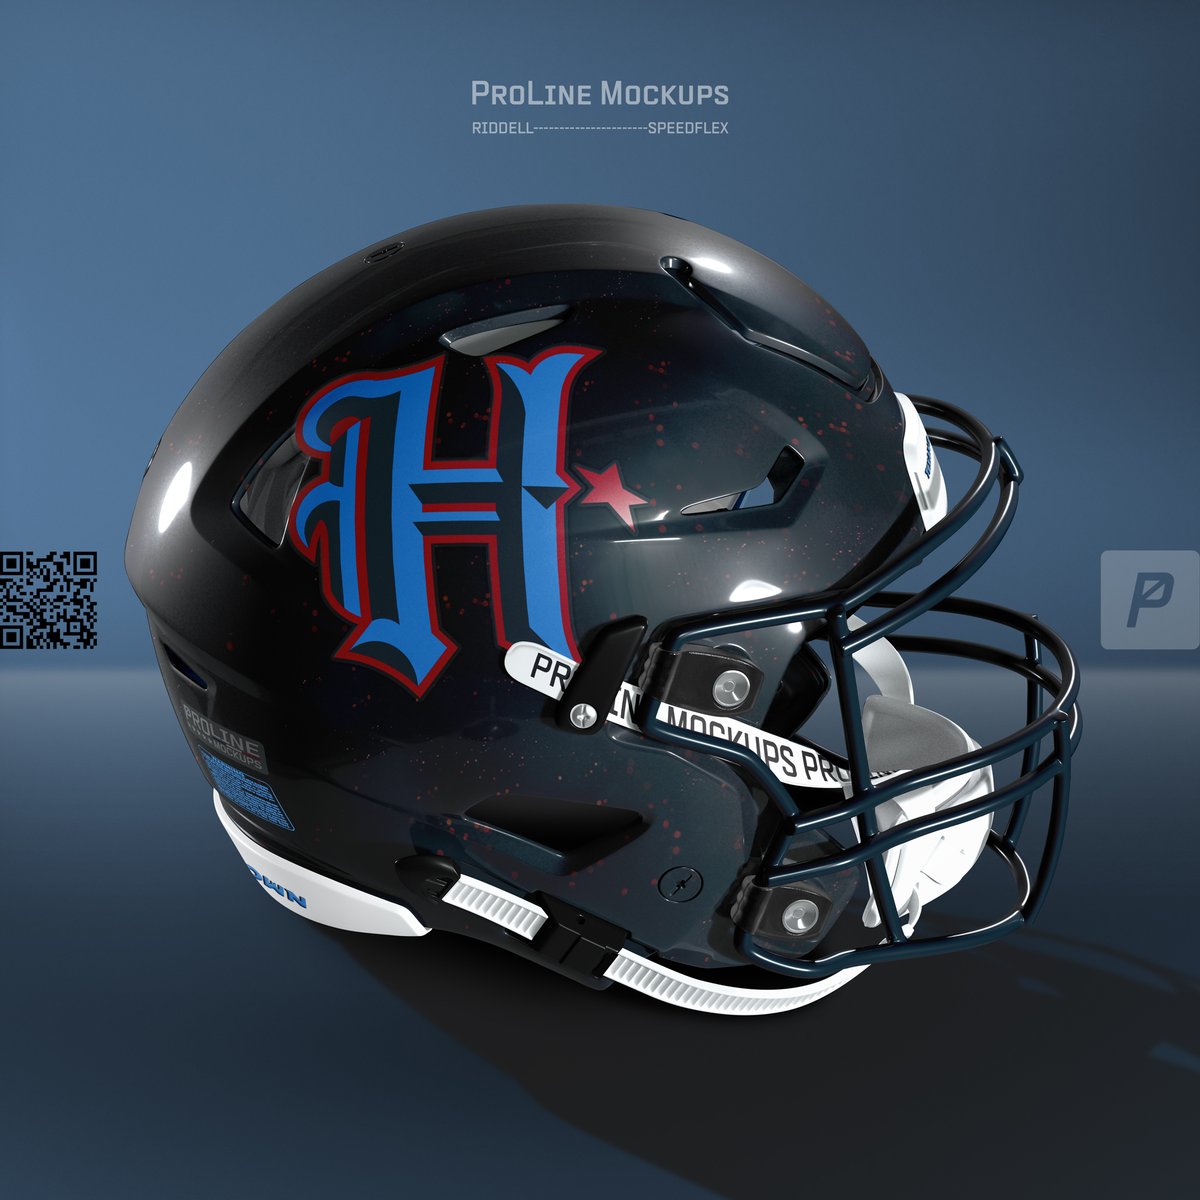 Here's a more realistic mockup of the new Texans H-Town helmet with the red flecks in the paint and the base gloss finish.